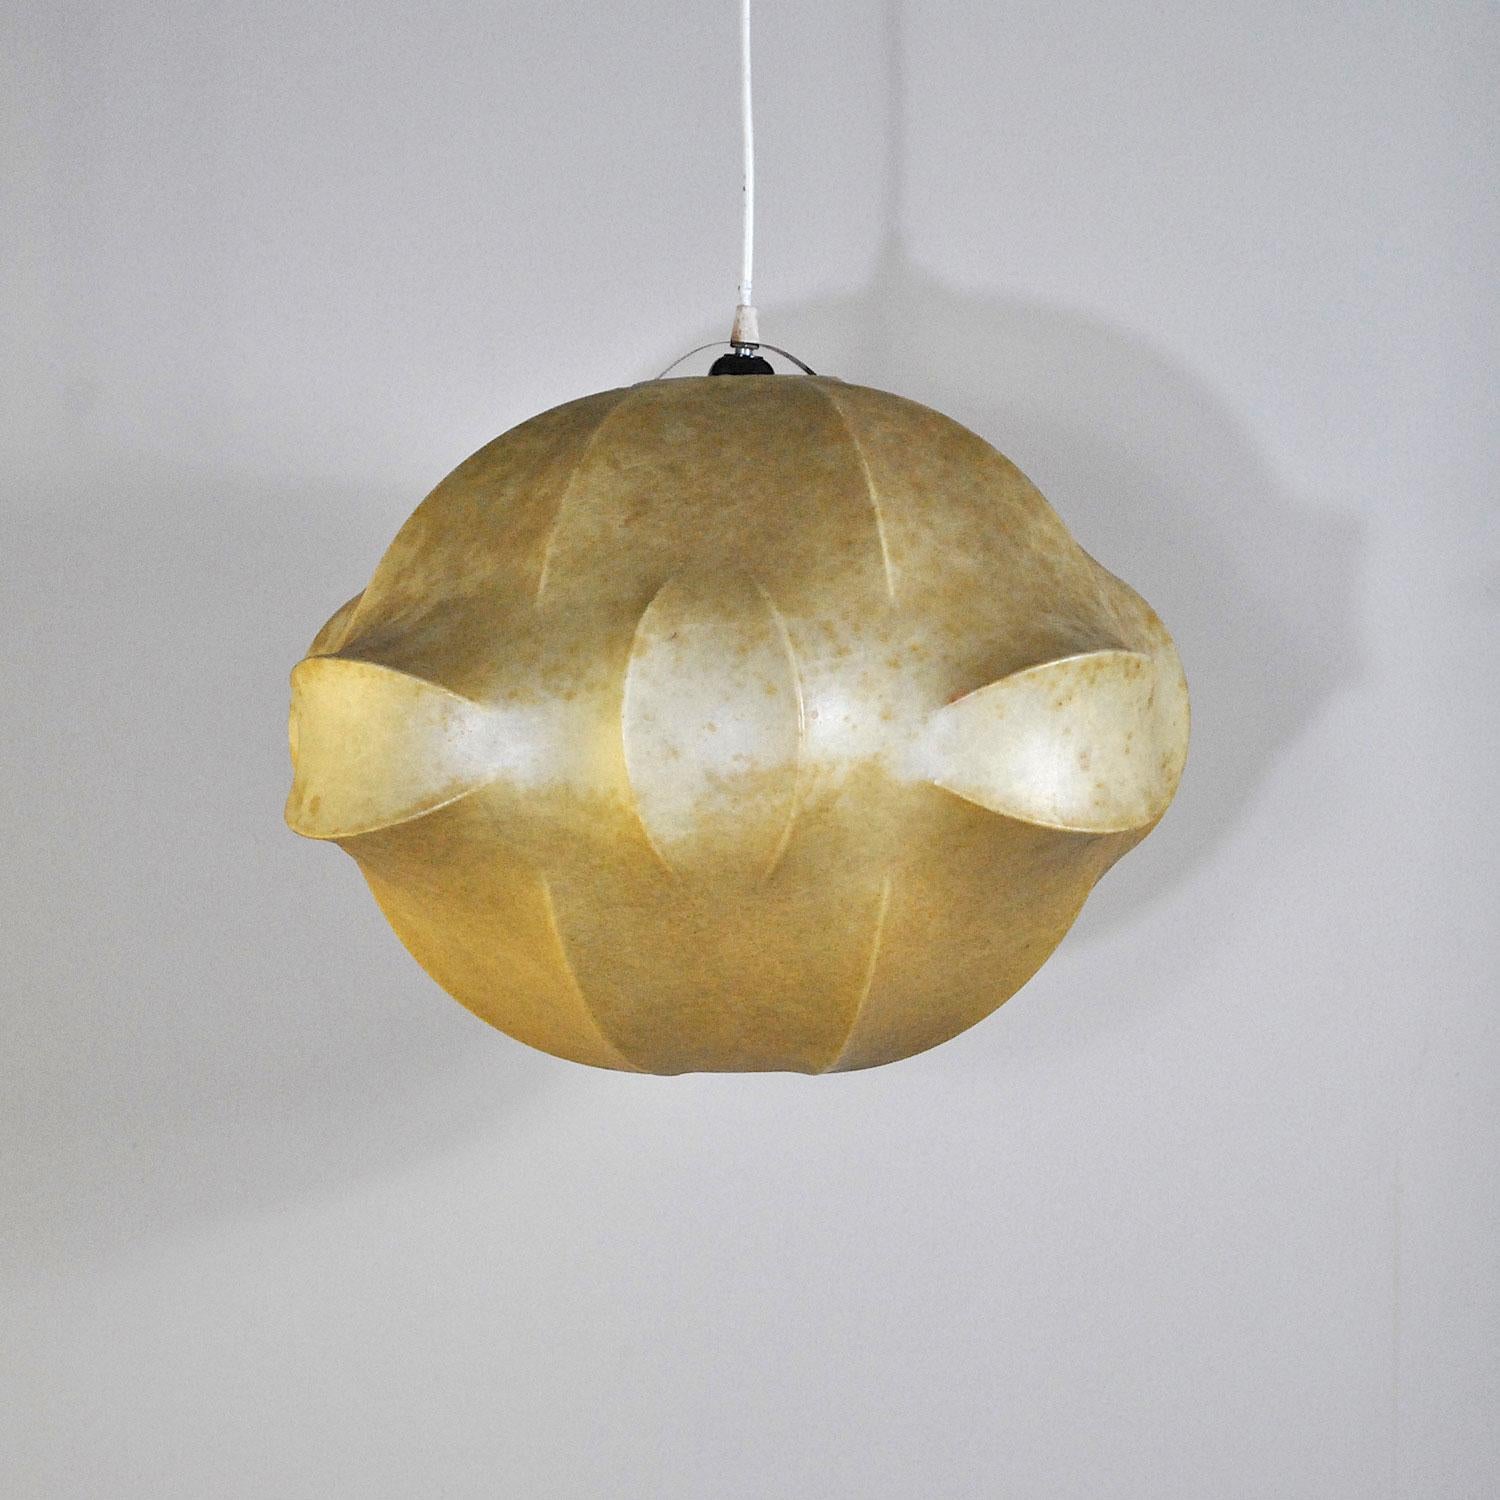 Particular chandelier designed by Tobia Scarpa for Flos in 1962, cocoon model, metal structure and resin diffuser.